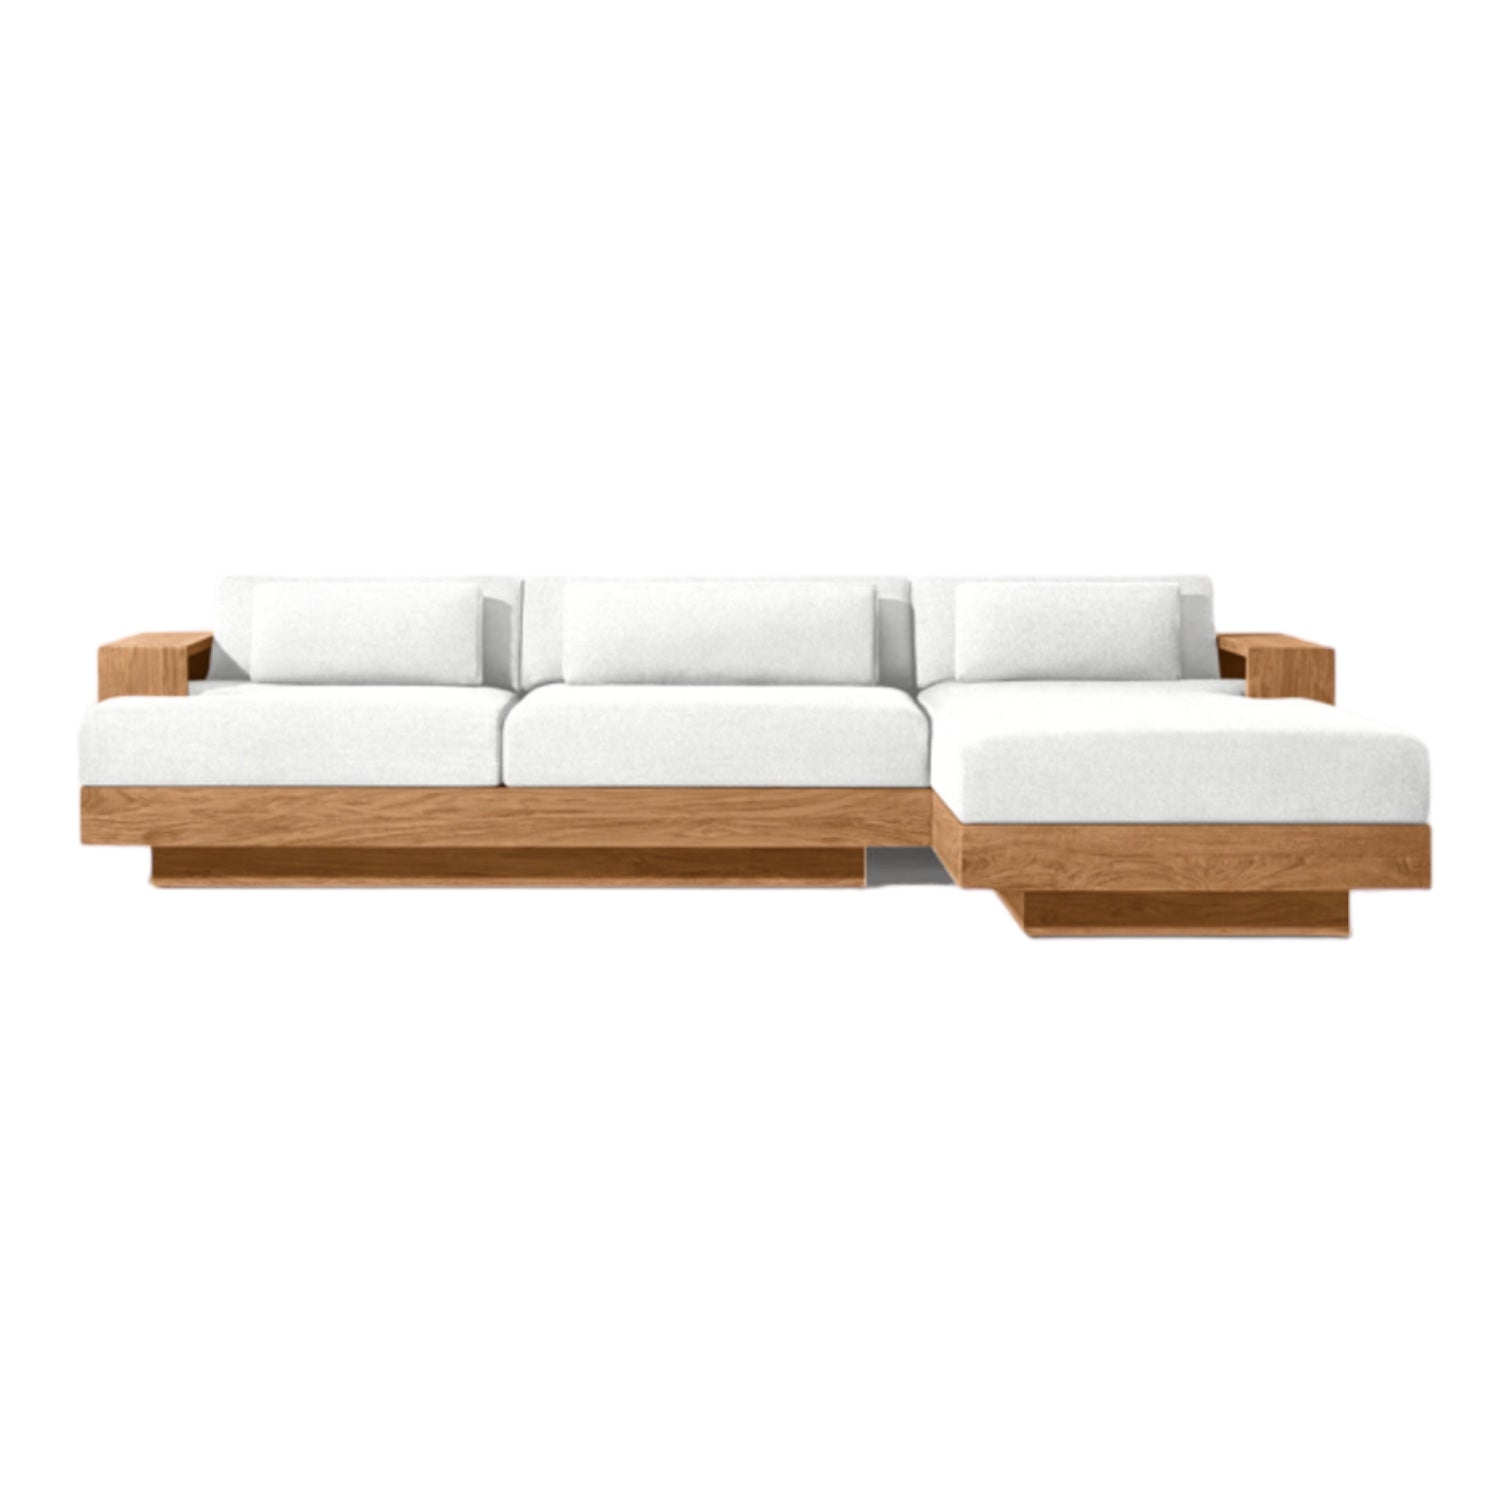 Modern Teak “La Cala” Sofa and Right Arm Day Bed